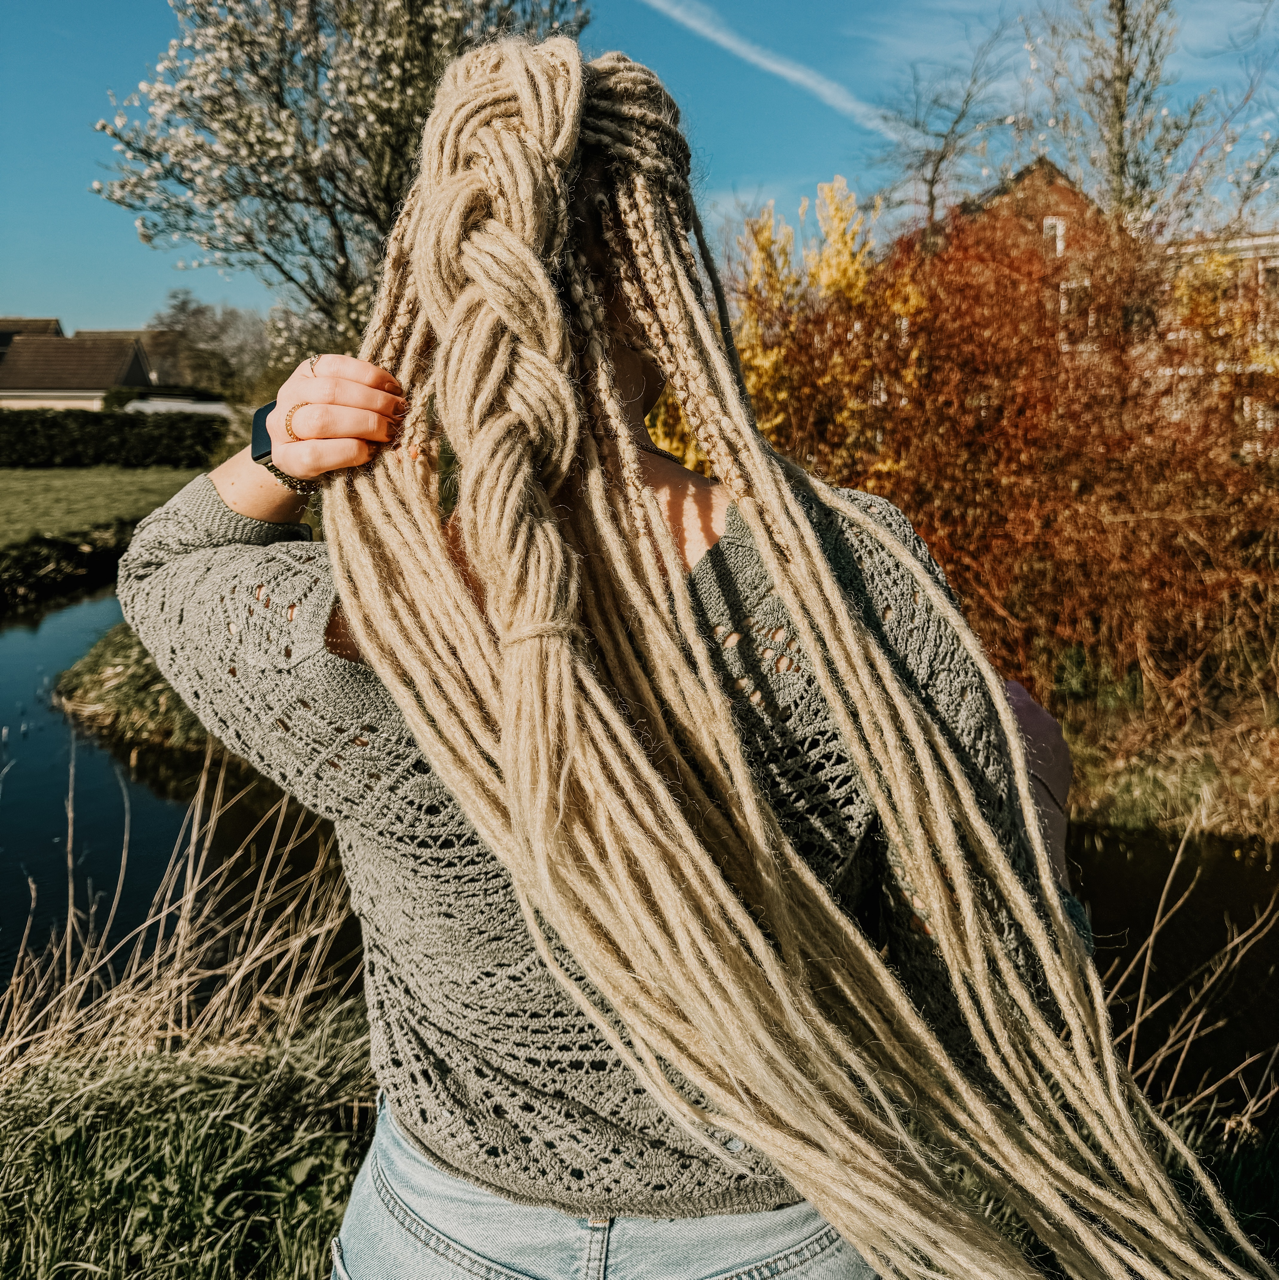 Are Dreadlocks permanent or not?